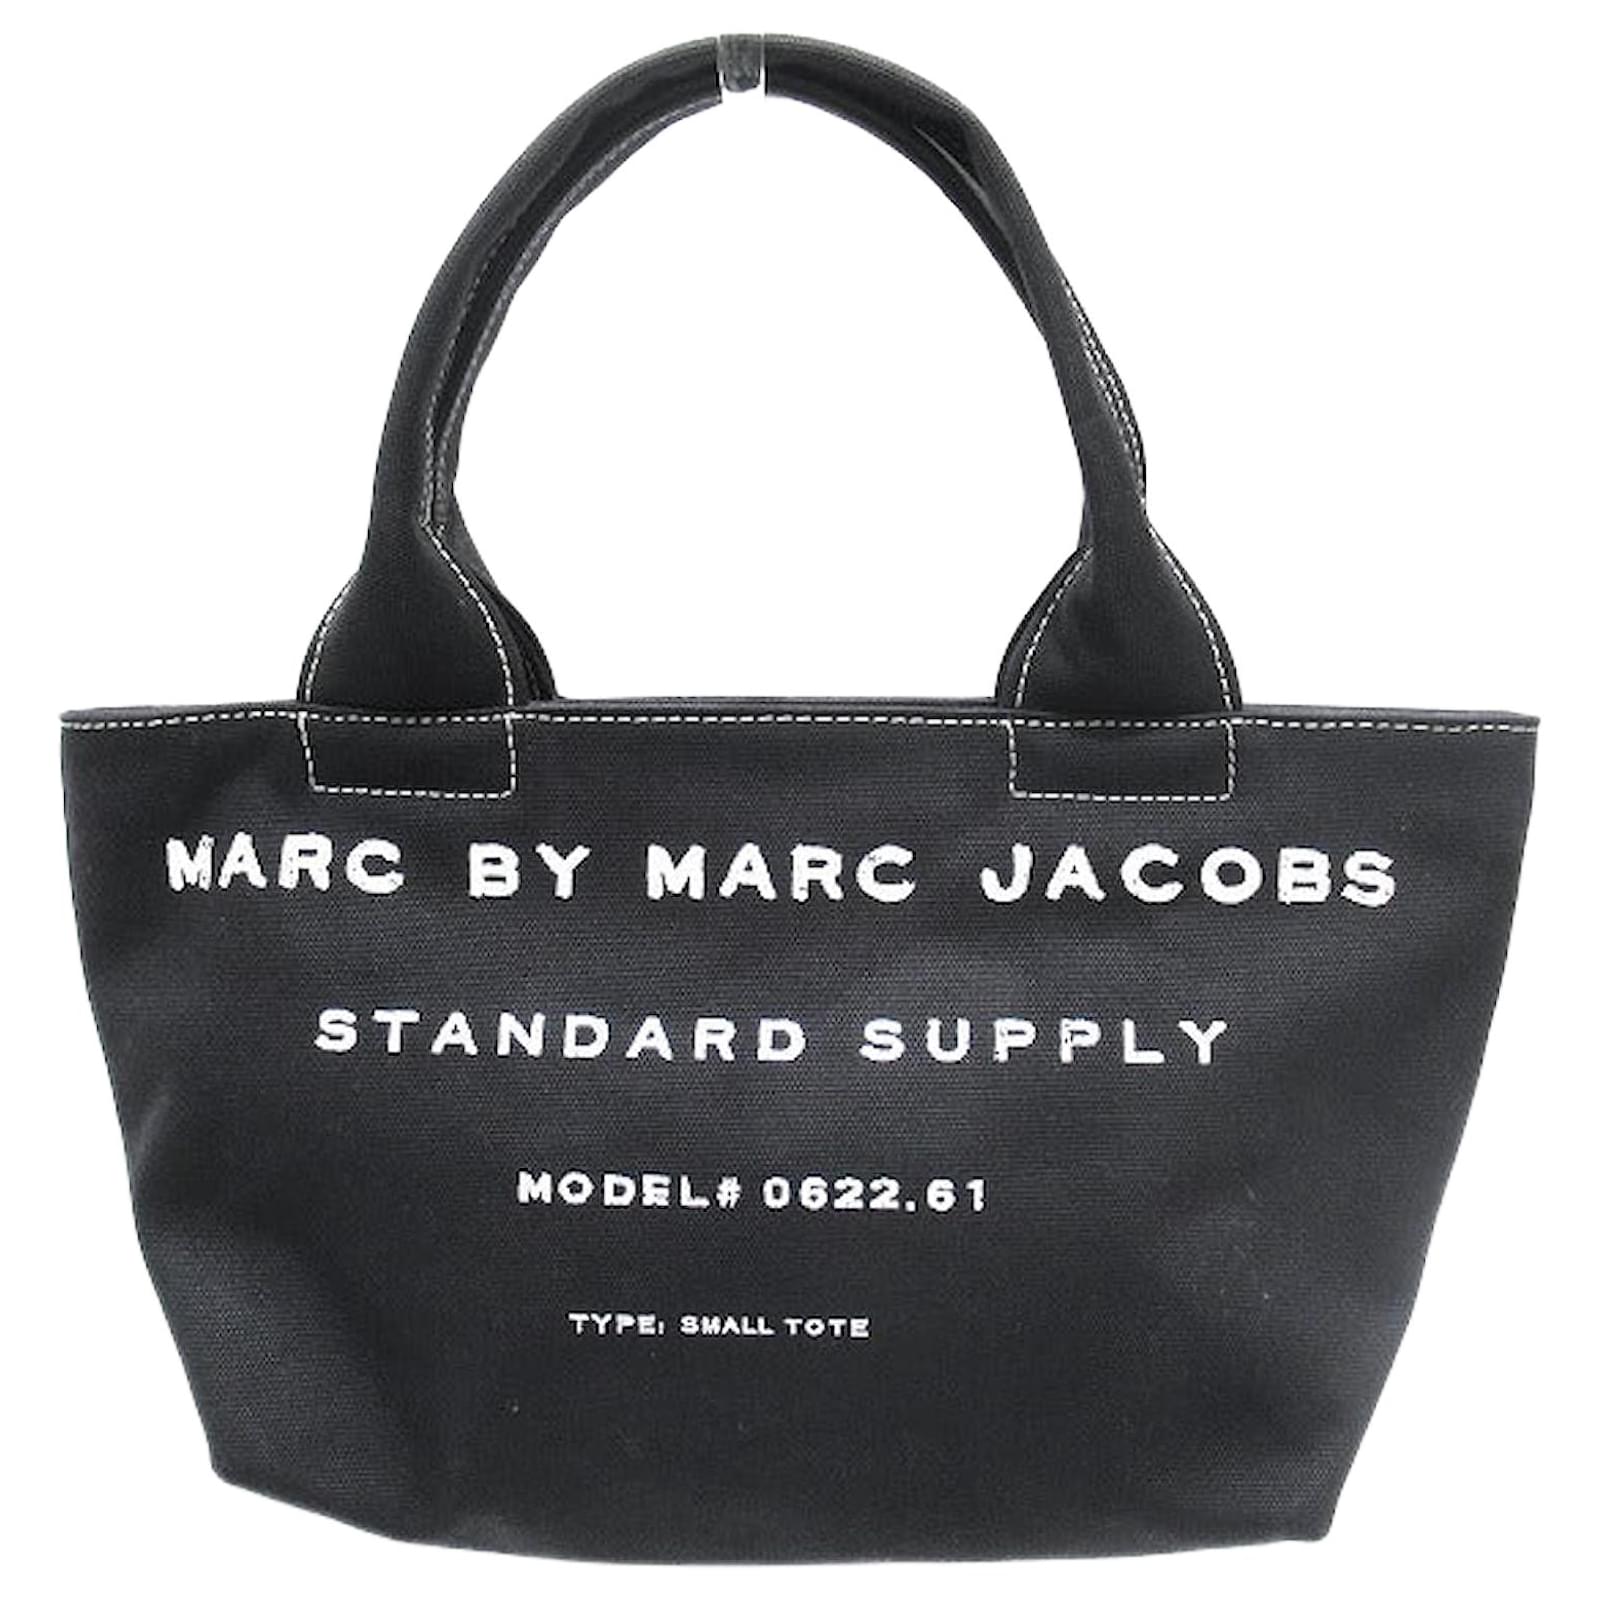 Canvas Standard Supply Tote Bag 0622.61